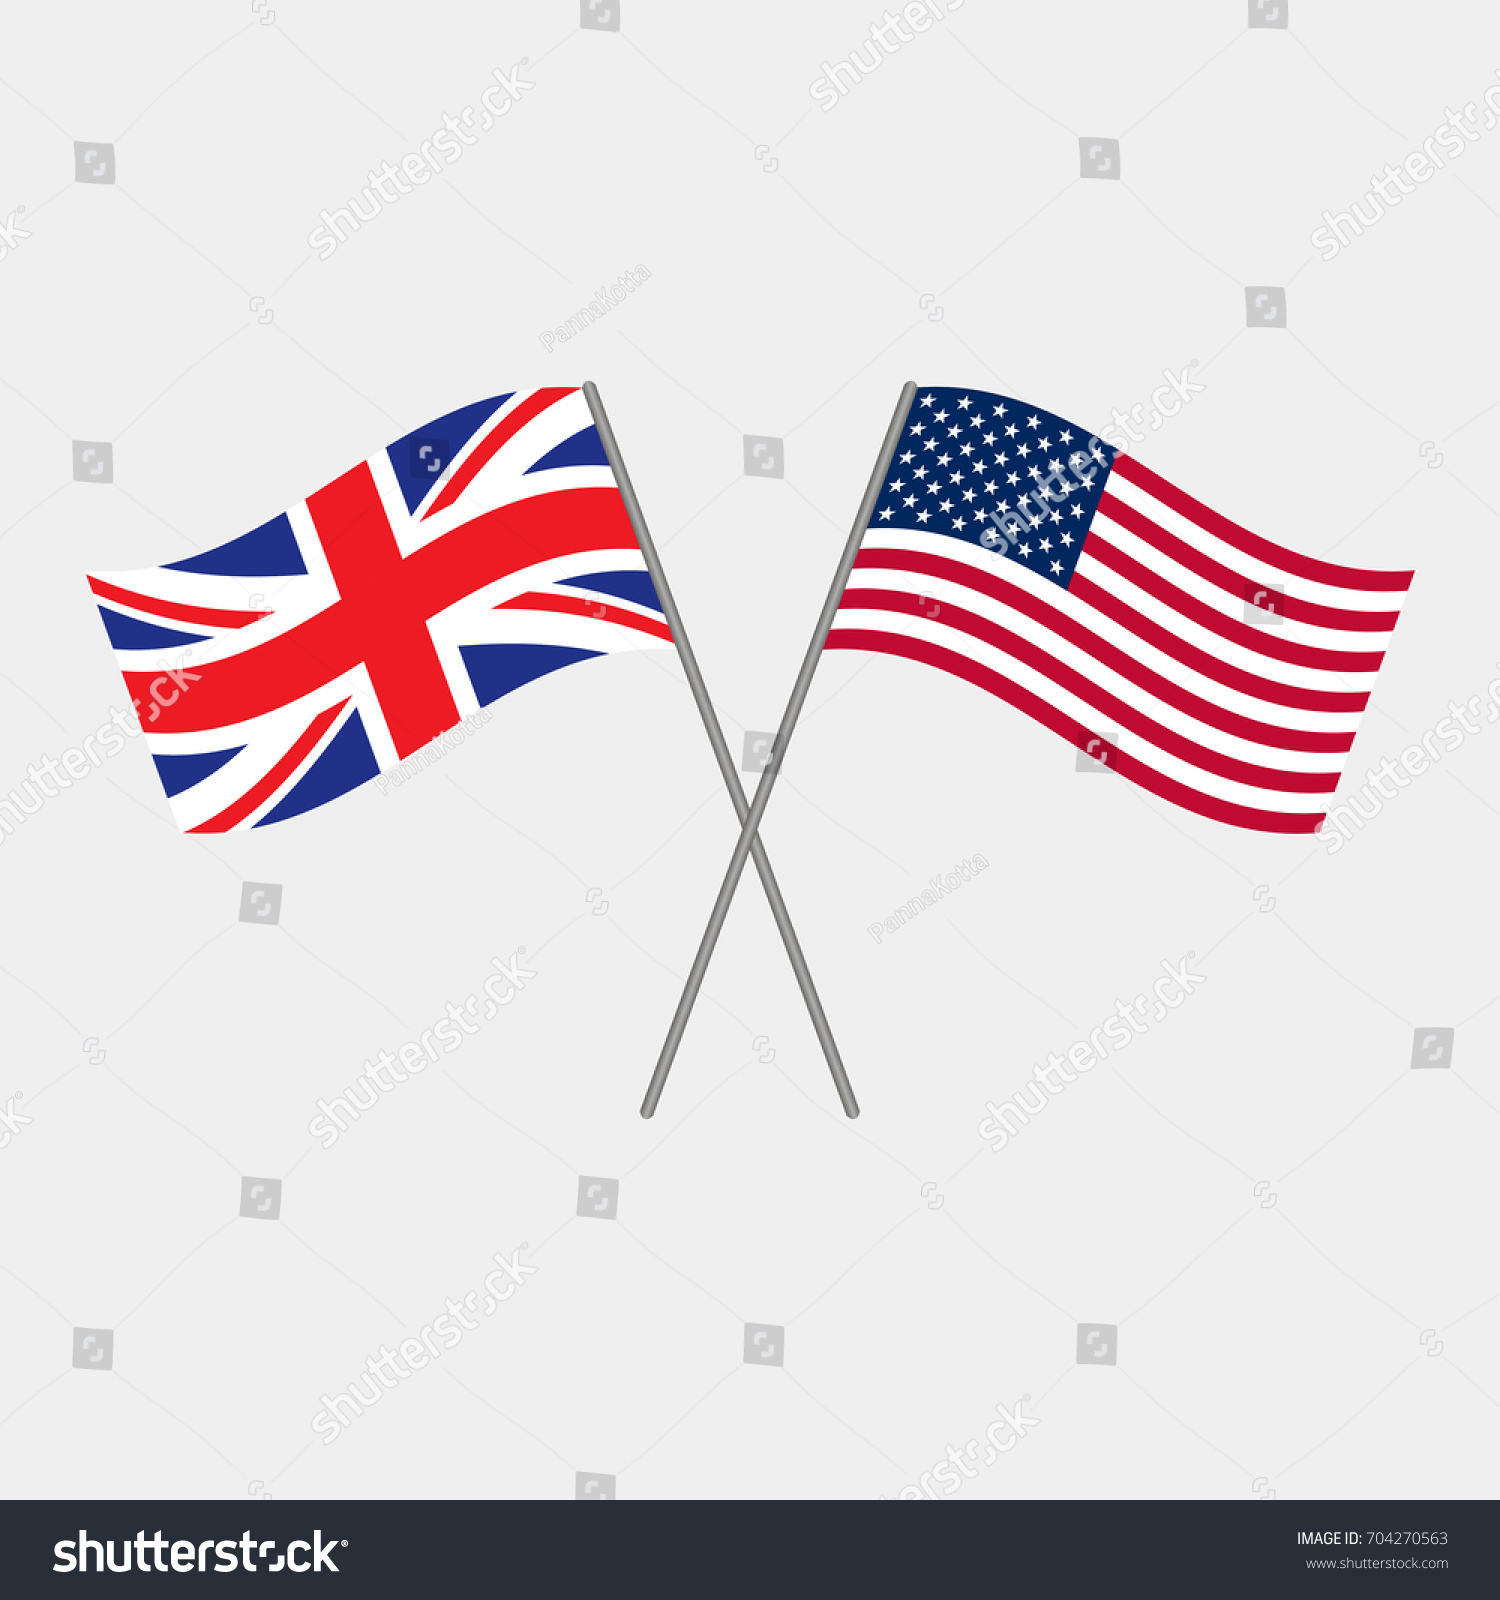 SVG of British and American flags, vector illustration svg